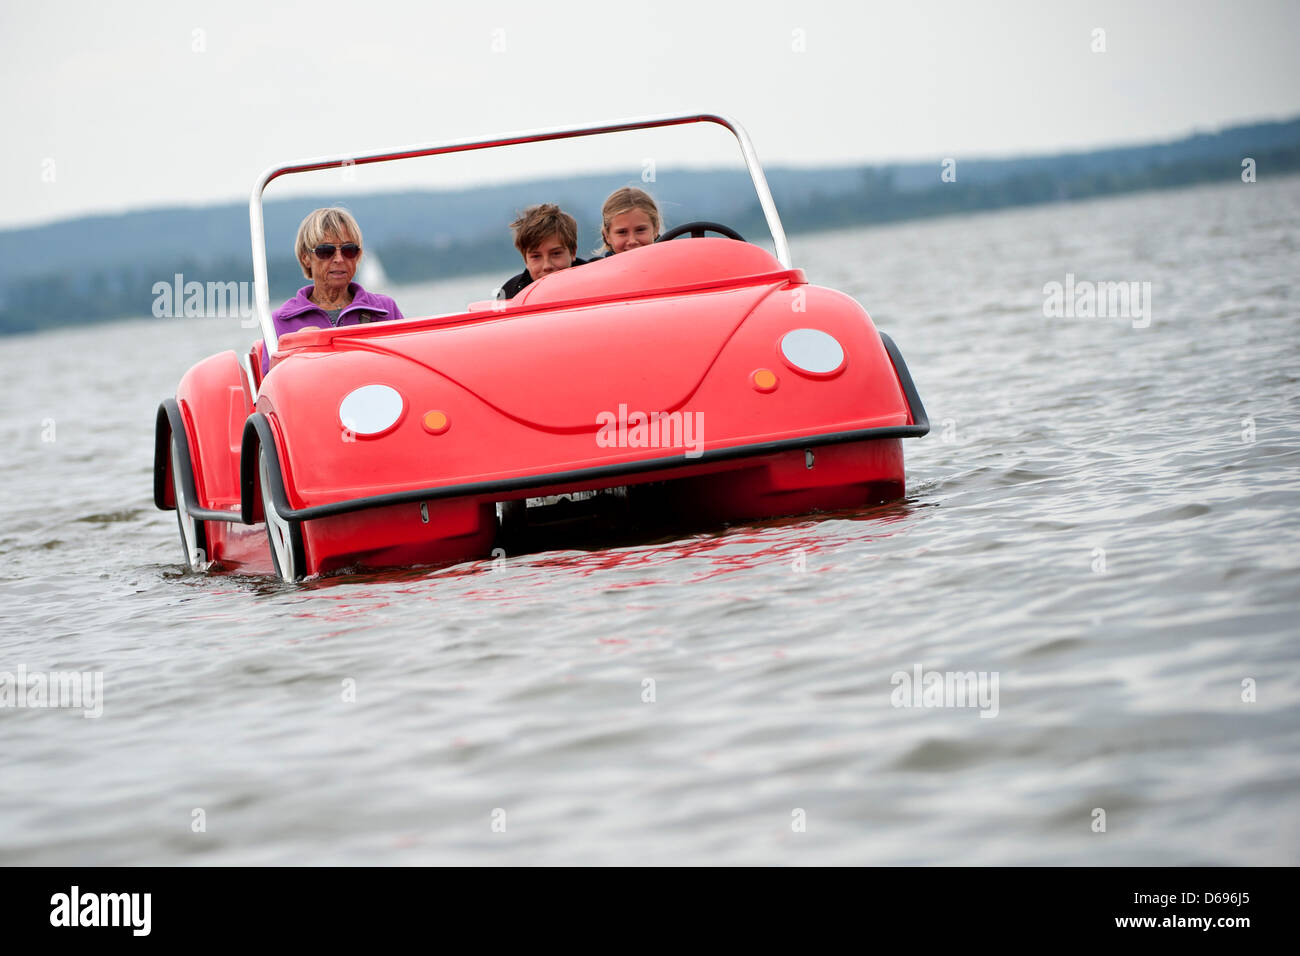 A family rides in a red paddle boat in the shape of a VW Beetle on Lake Steinhude in Steinhude, Germany, 31 July 2012. Even on cloudy days, the lake is a well-loved get-away location. Photo: Emily Wabitsch Stock Photo